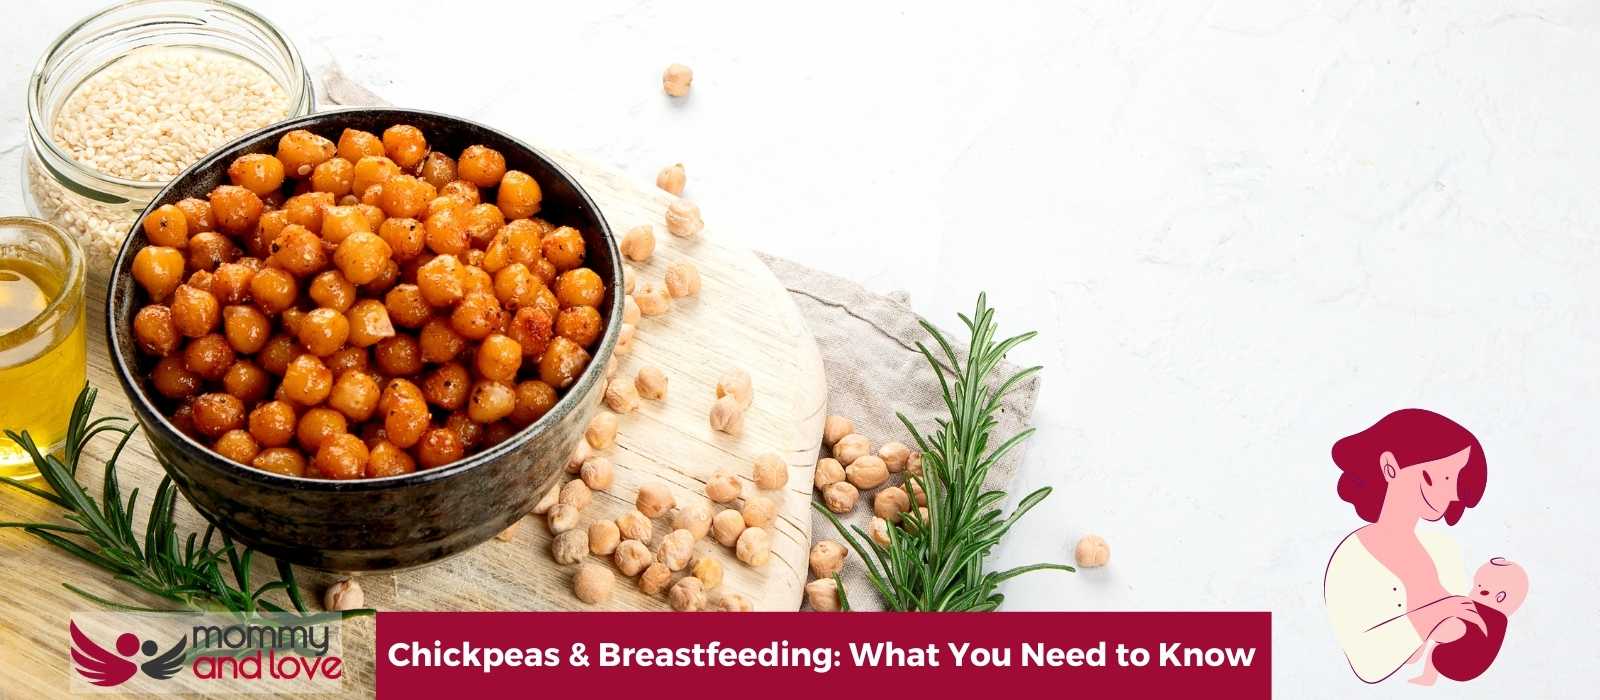 Chickpeas & Breastfeeding What You Need to Know